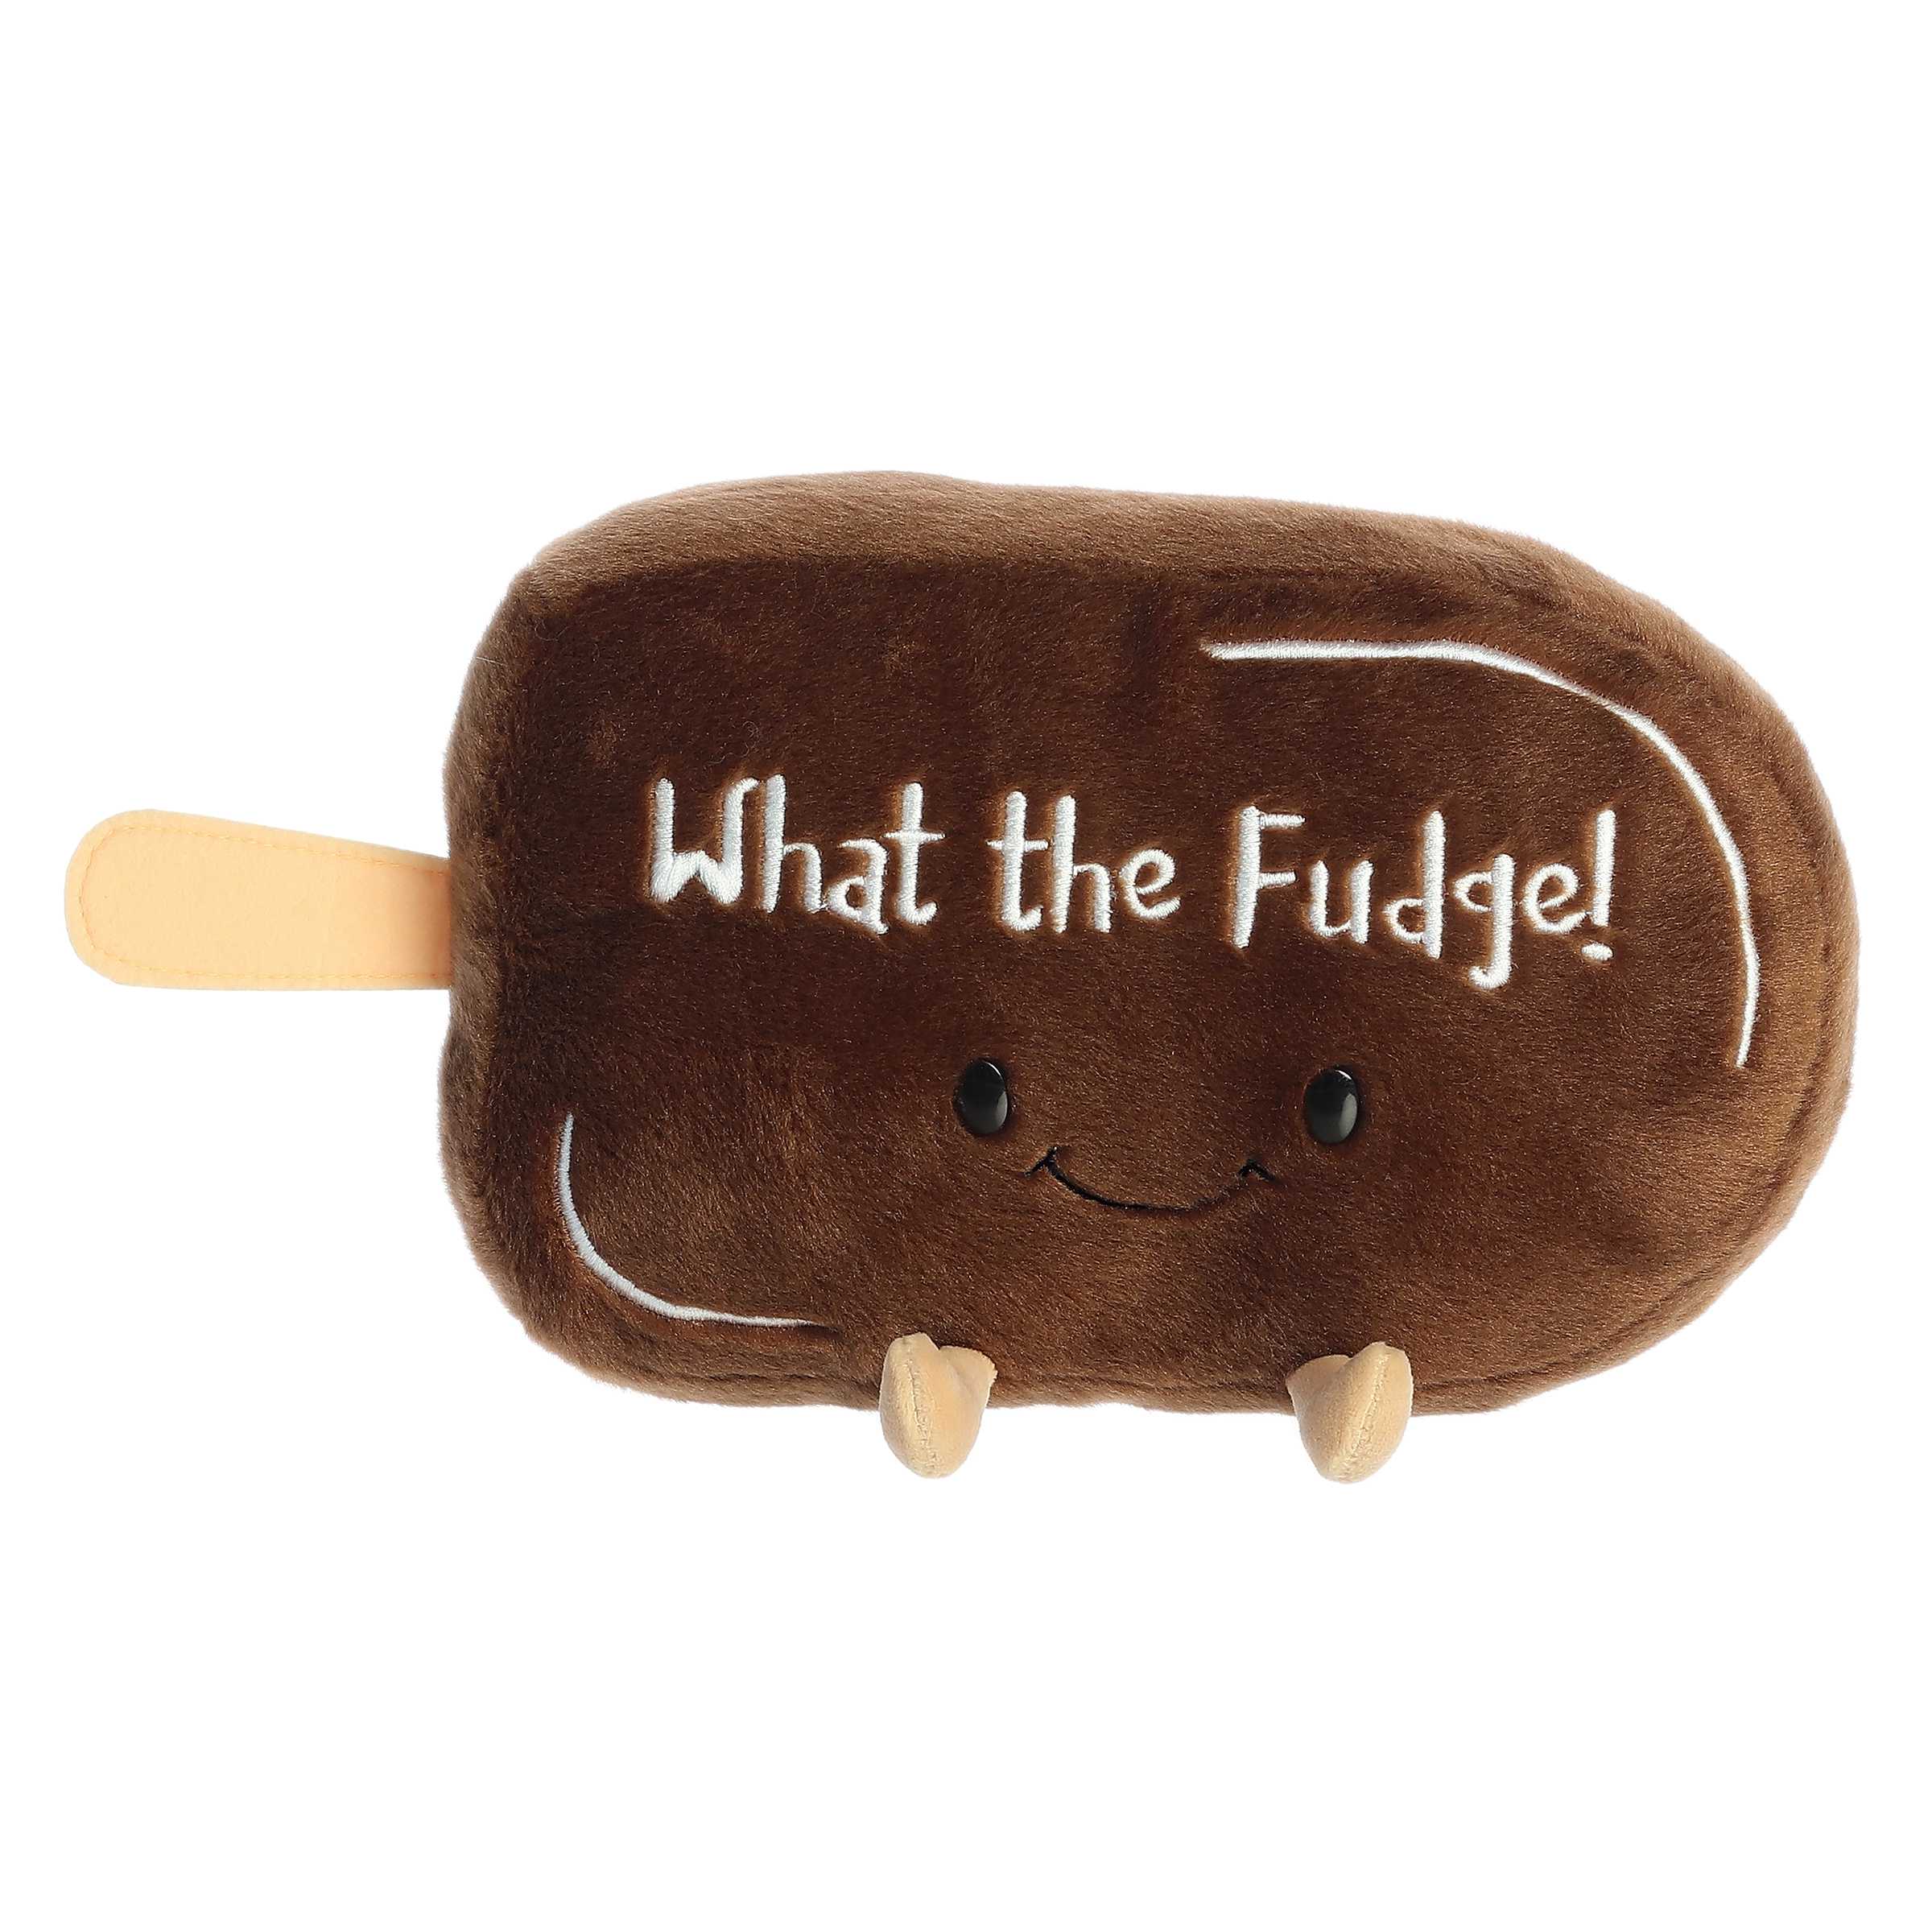 Quirky fudge ice cream bar plush with dark brown body, "what the fudge!" pun written across and an embroidered smiling face